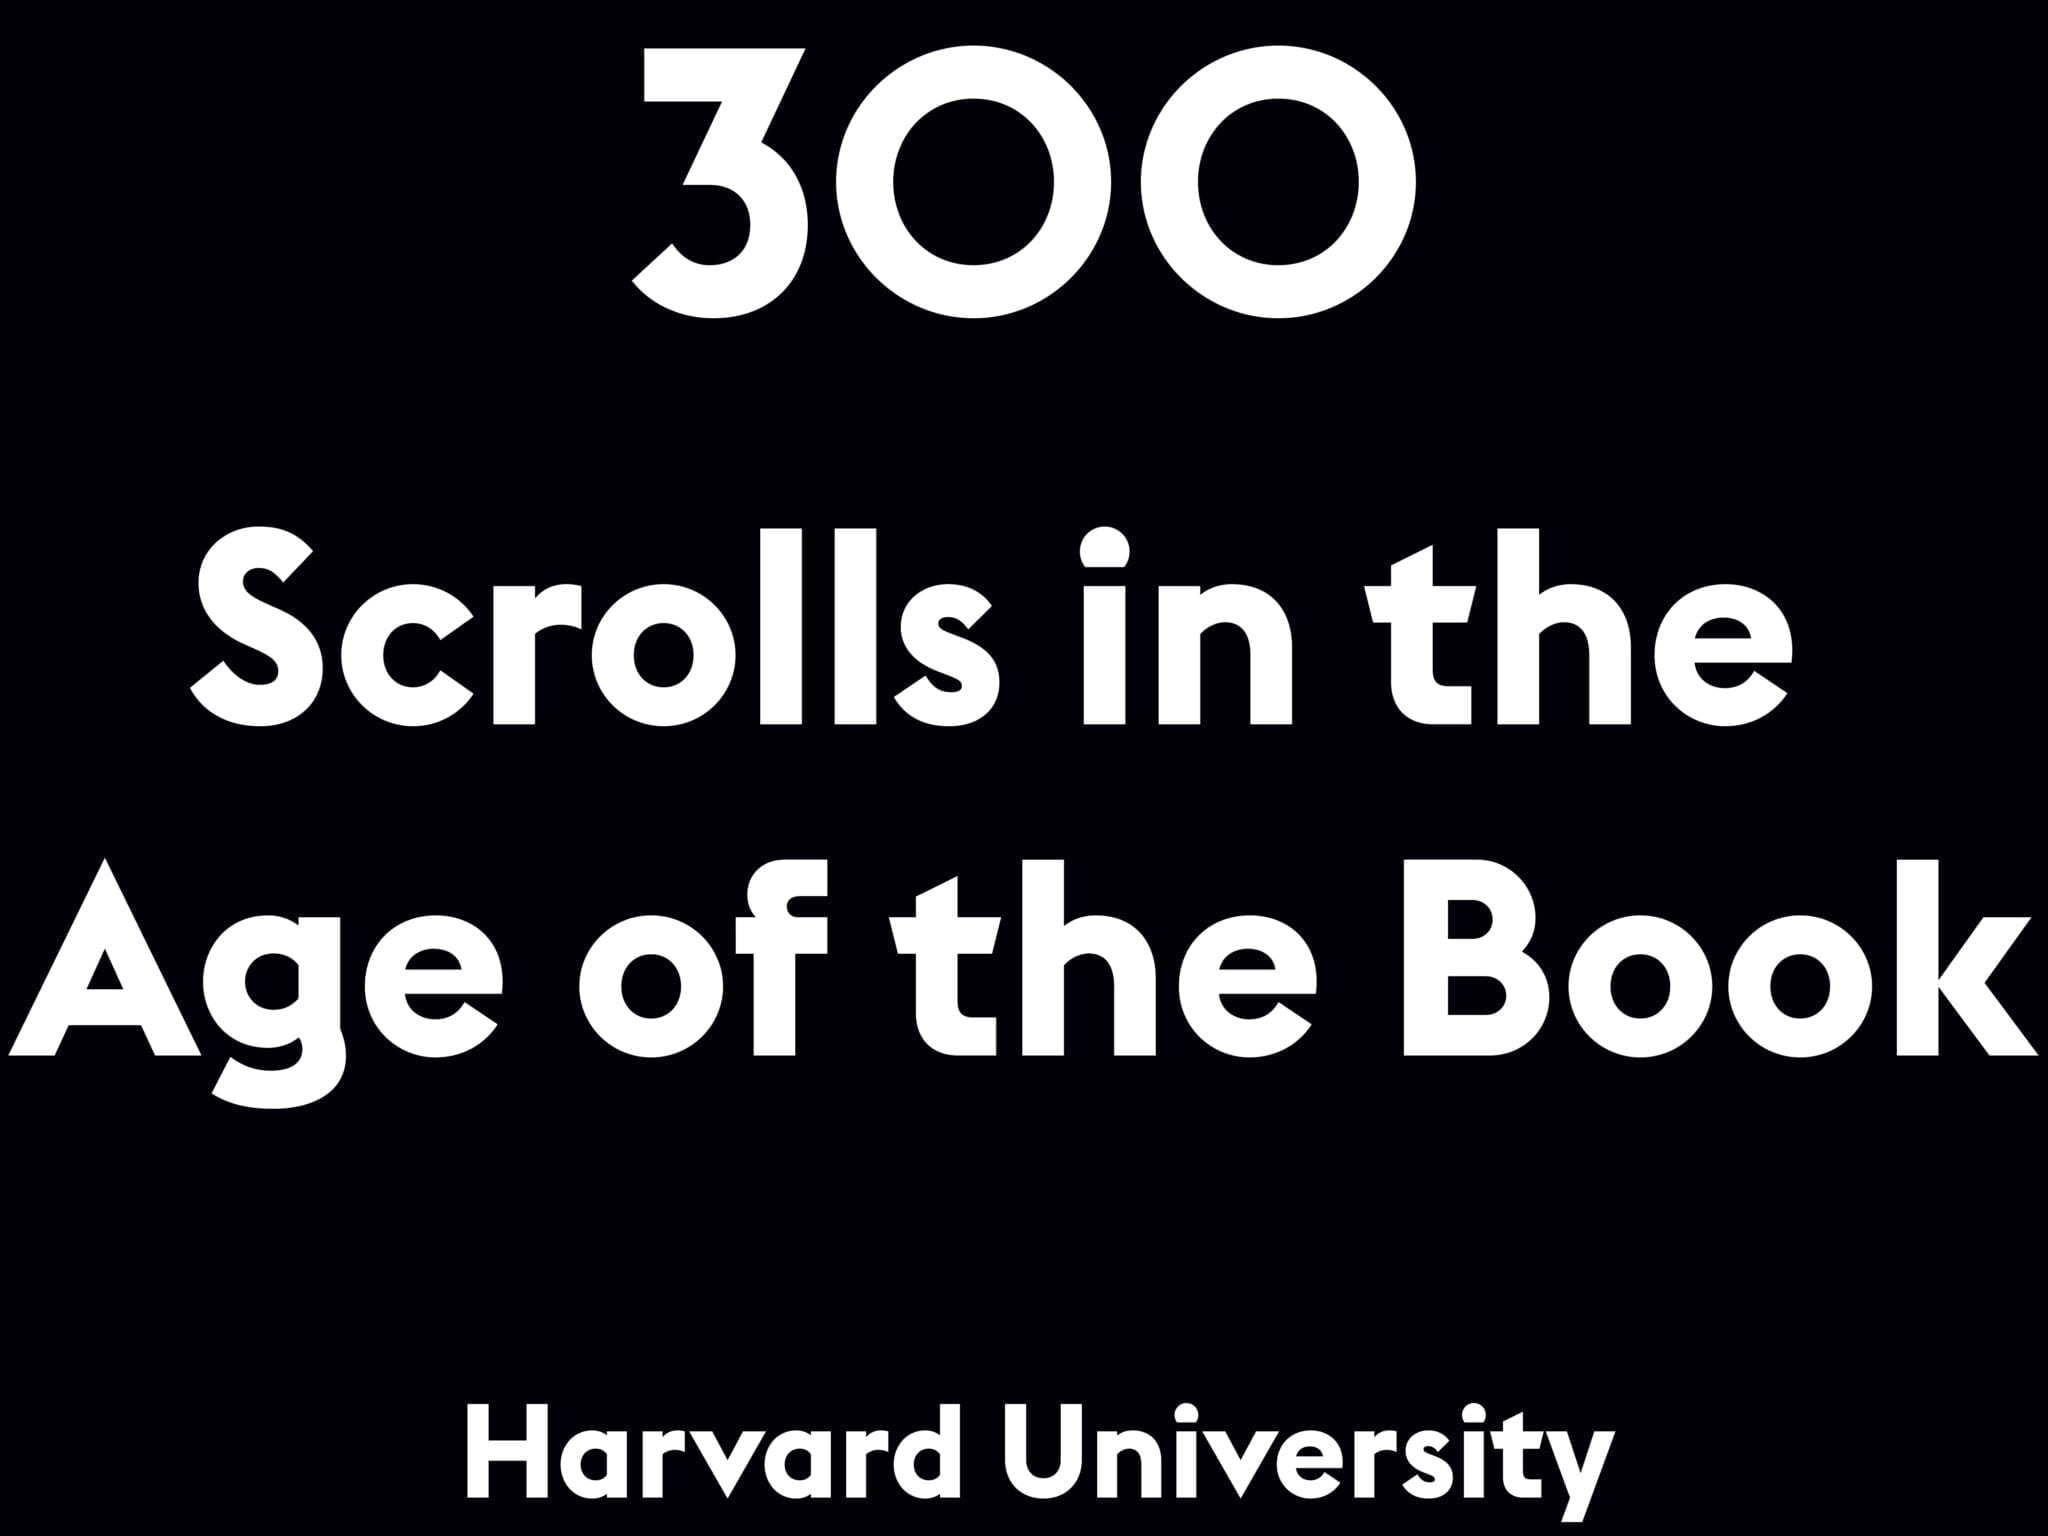 Scrolls in the Age of the Book